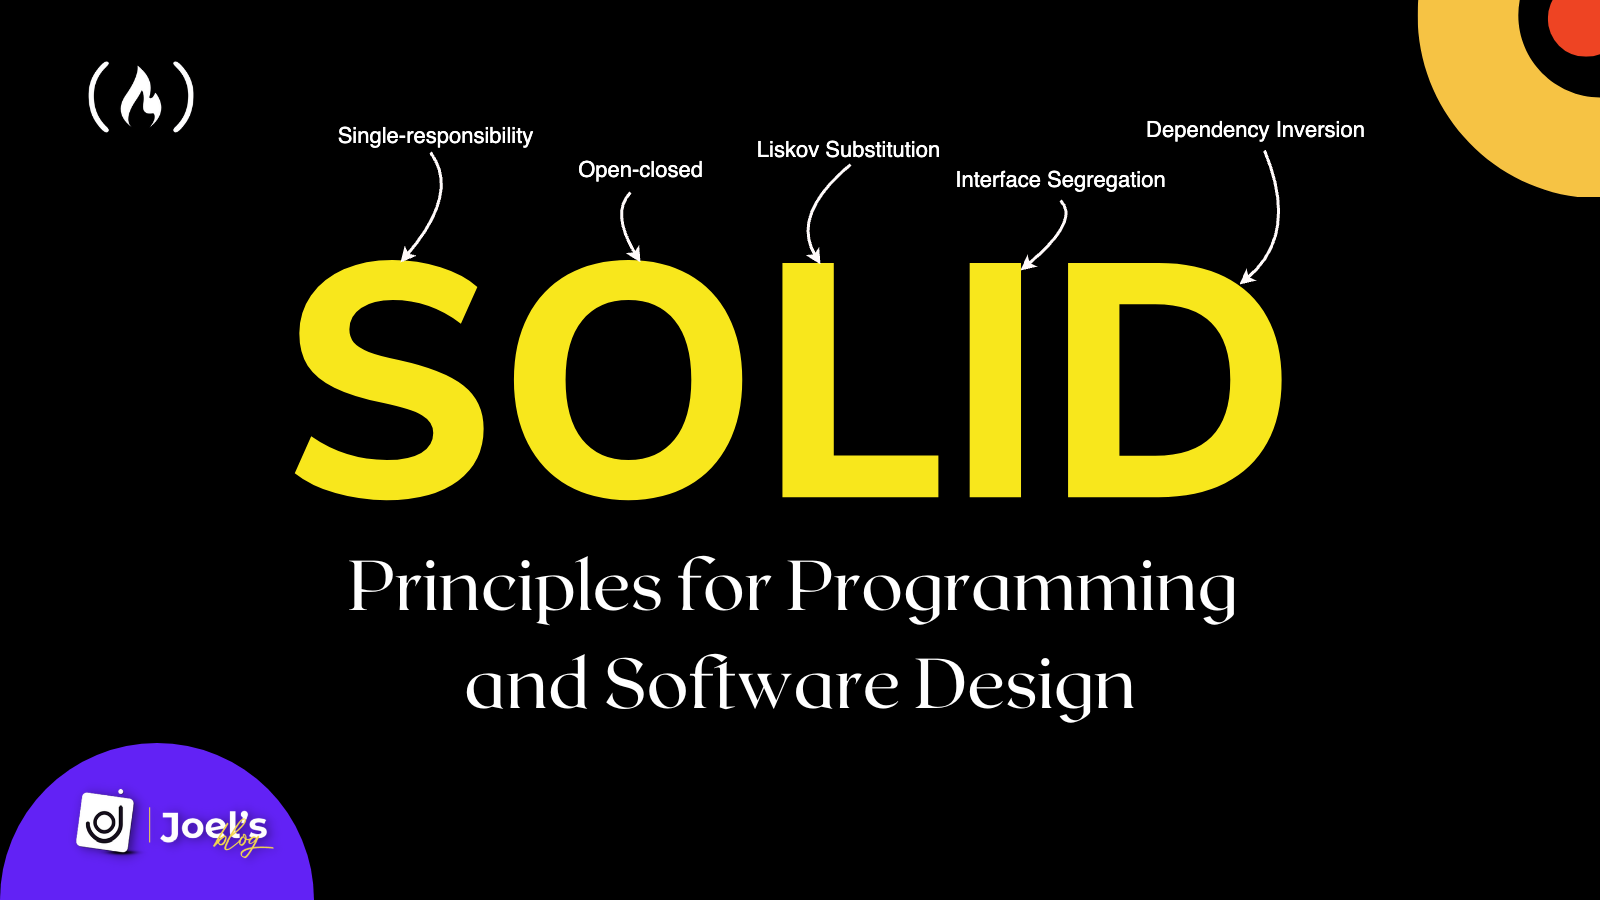 SOLID Principles for Programming and Software Design